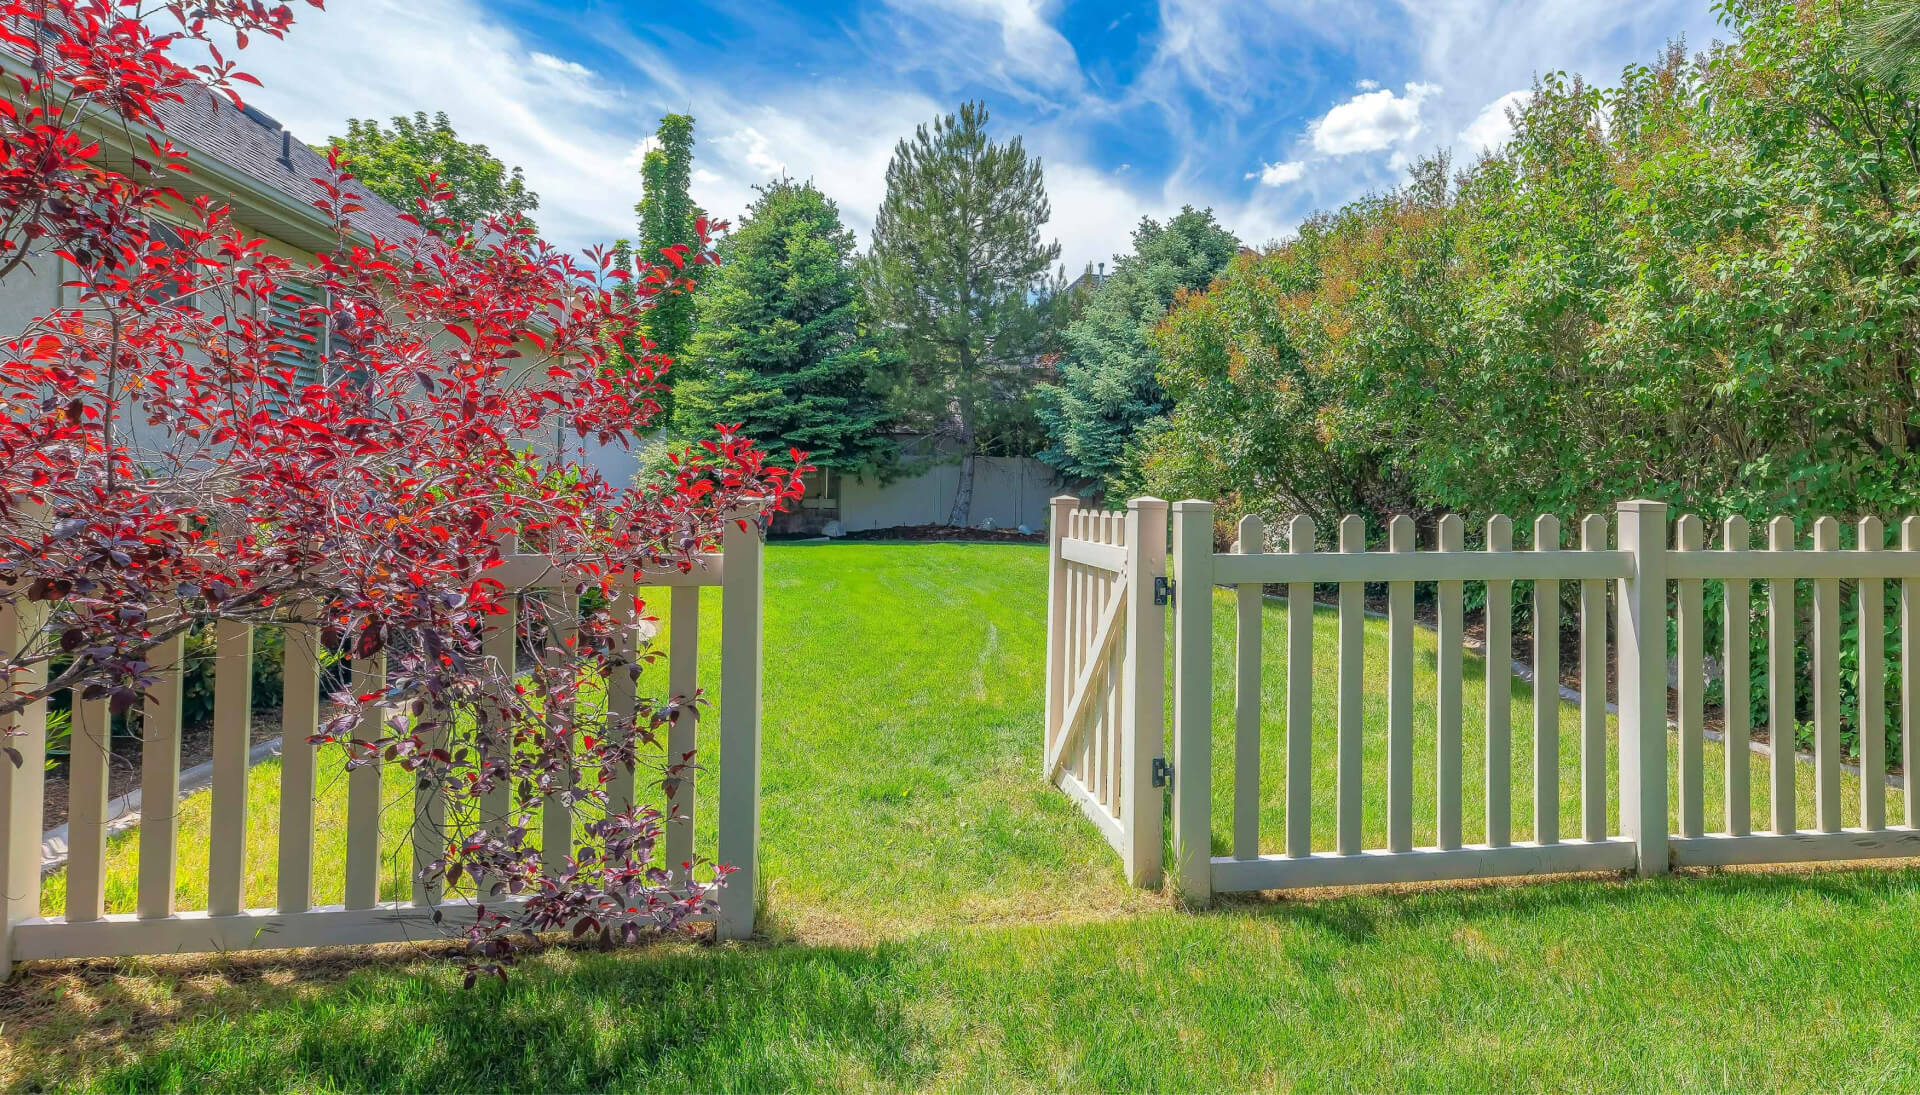 A functional fence gate providing access to a well-maintained backyard, surrounded by a wooden fence in Lincoln